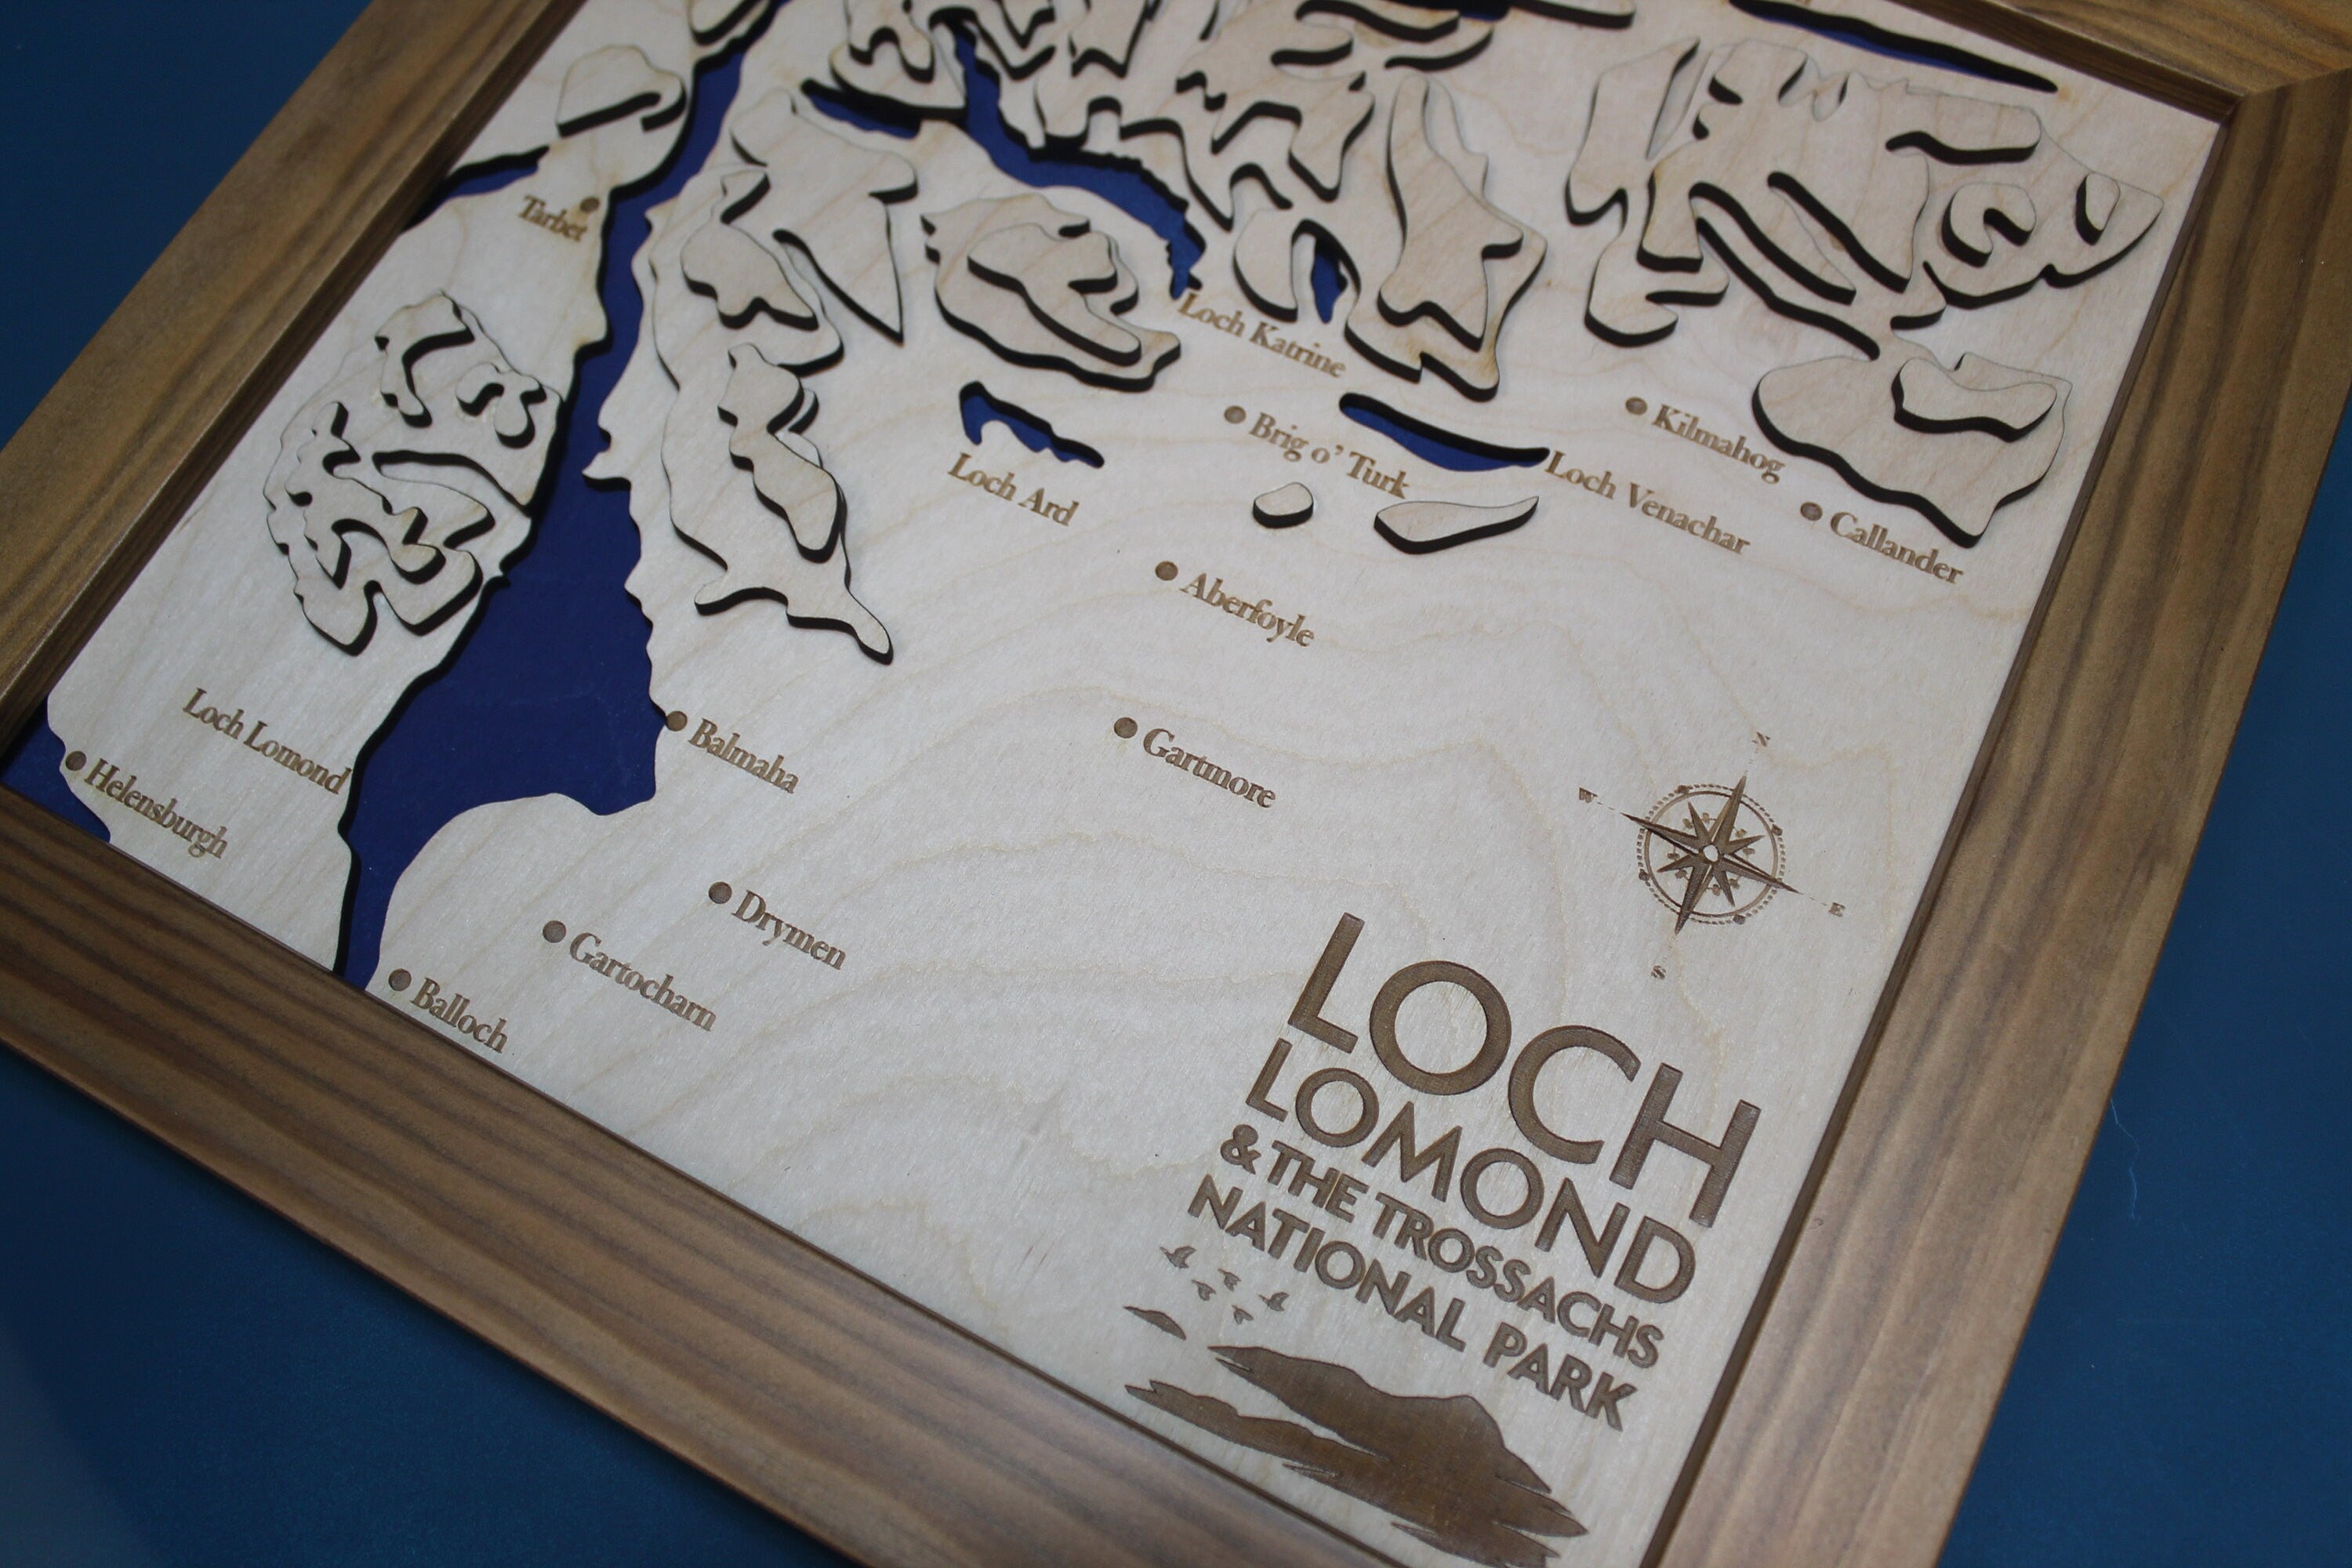 3D Loch Lomond and the Trossachs Map - Wooden Topographical Map